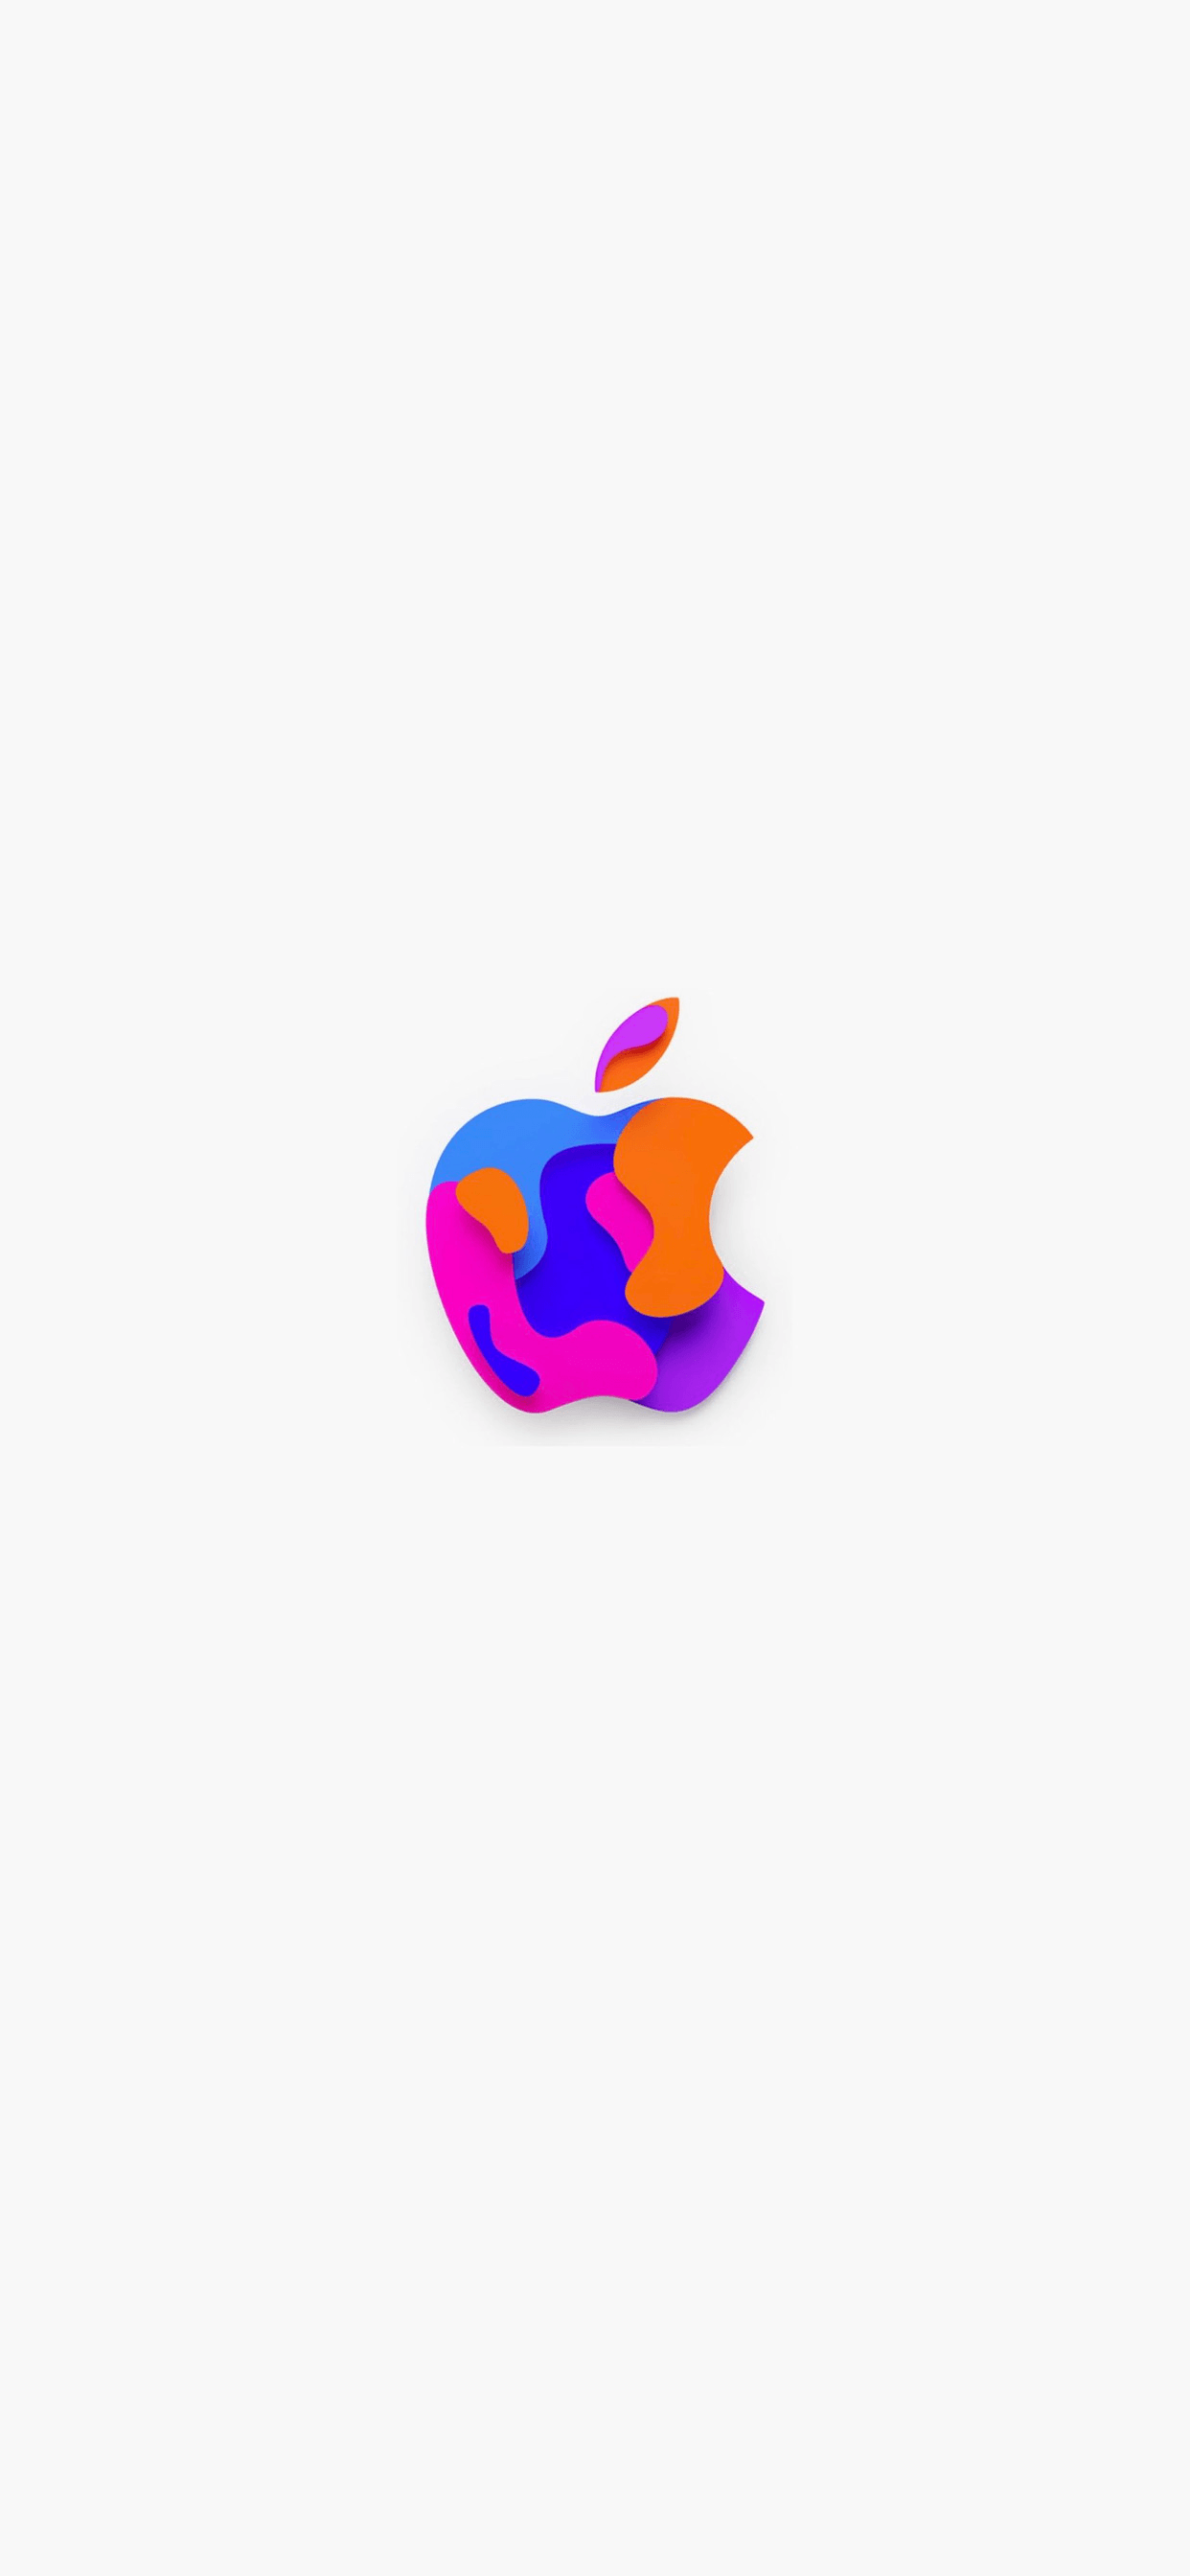 2018 Apple Logo - There's more in the making: 33 Apple logo wallpaper